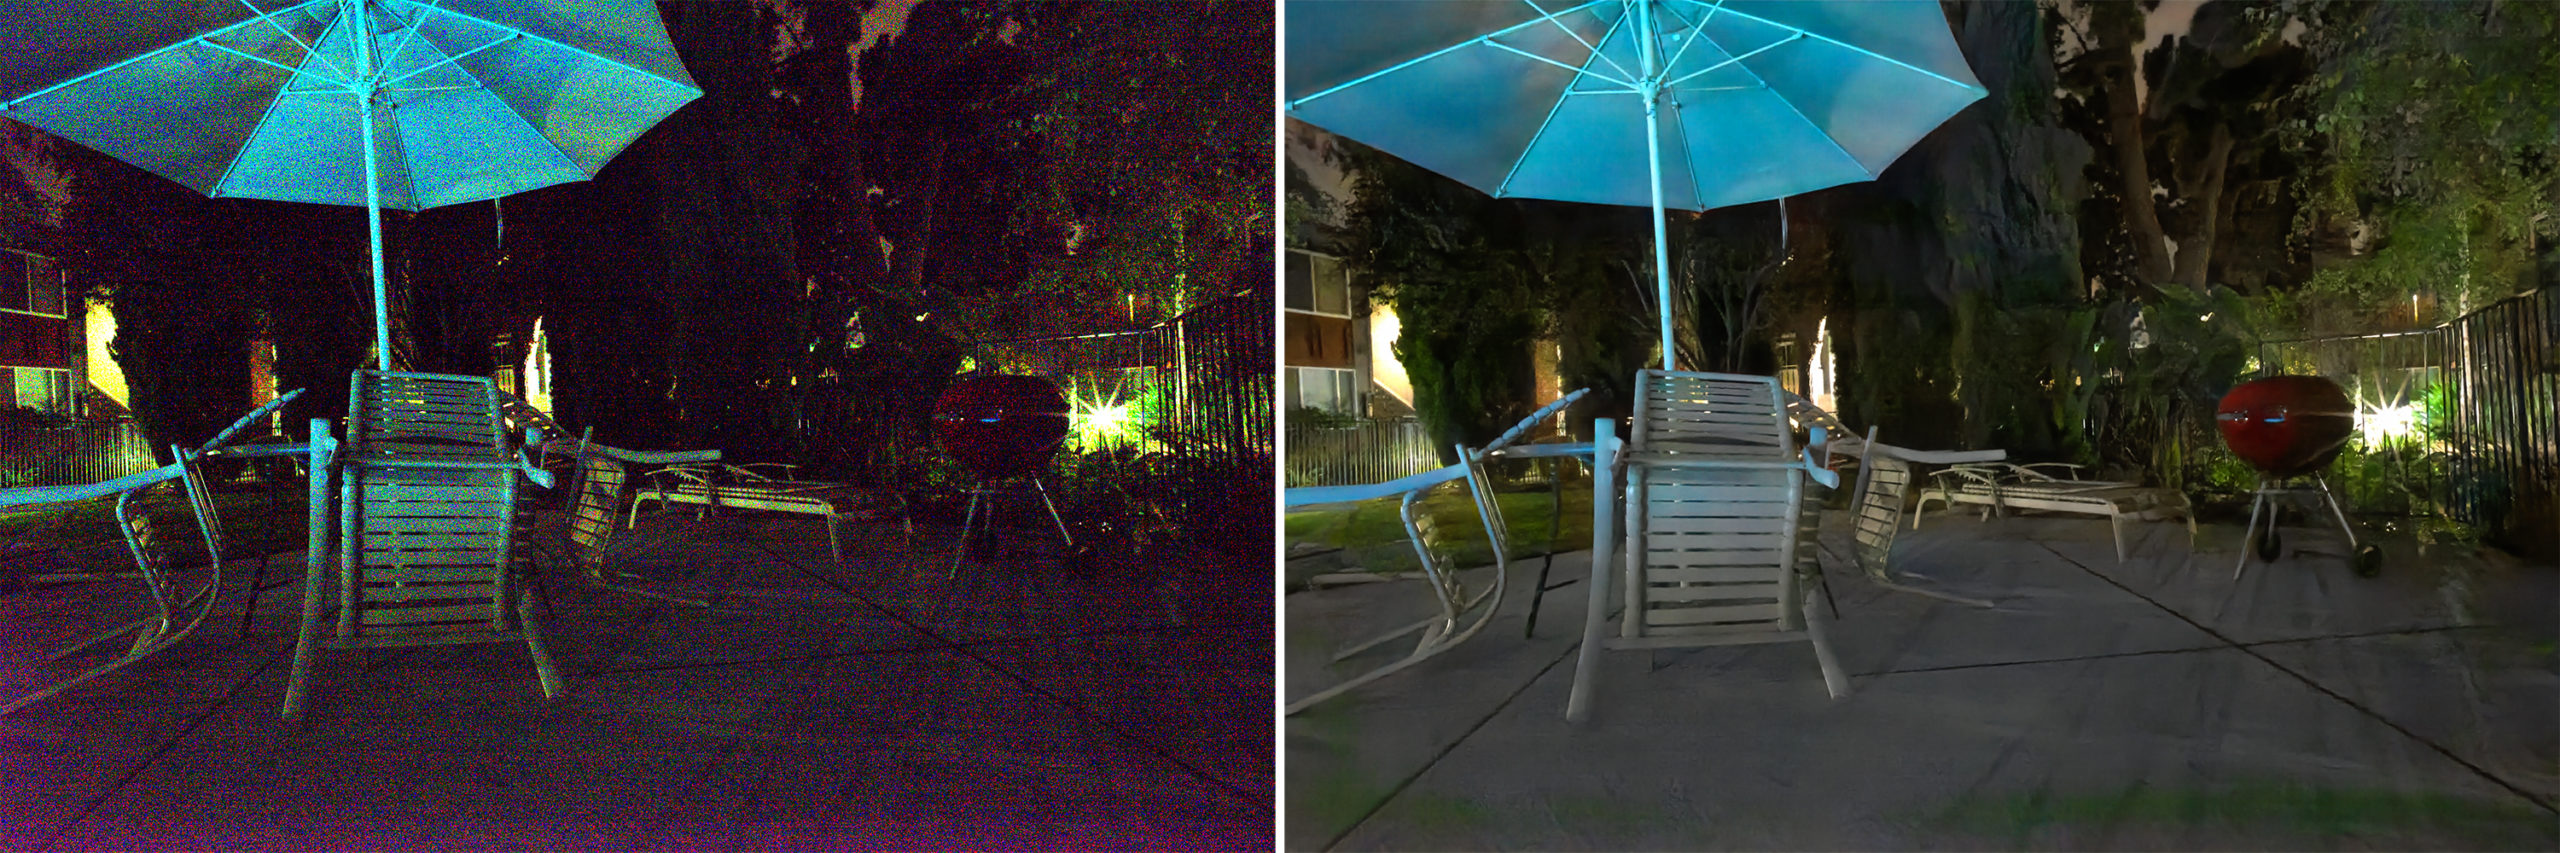 Deep Learning Can Now Flawlessly Correct Photos Taken In Almost Complete Darkness